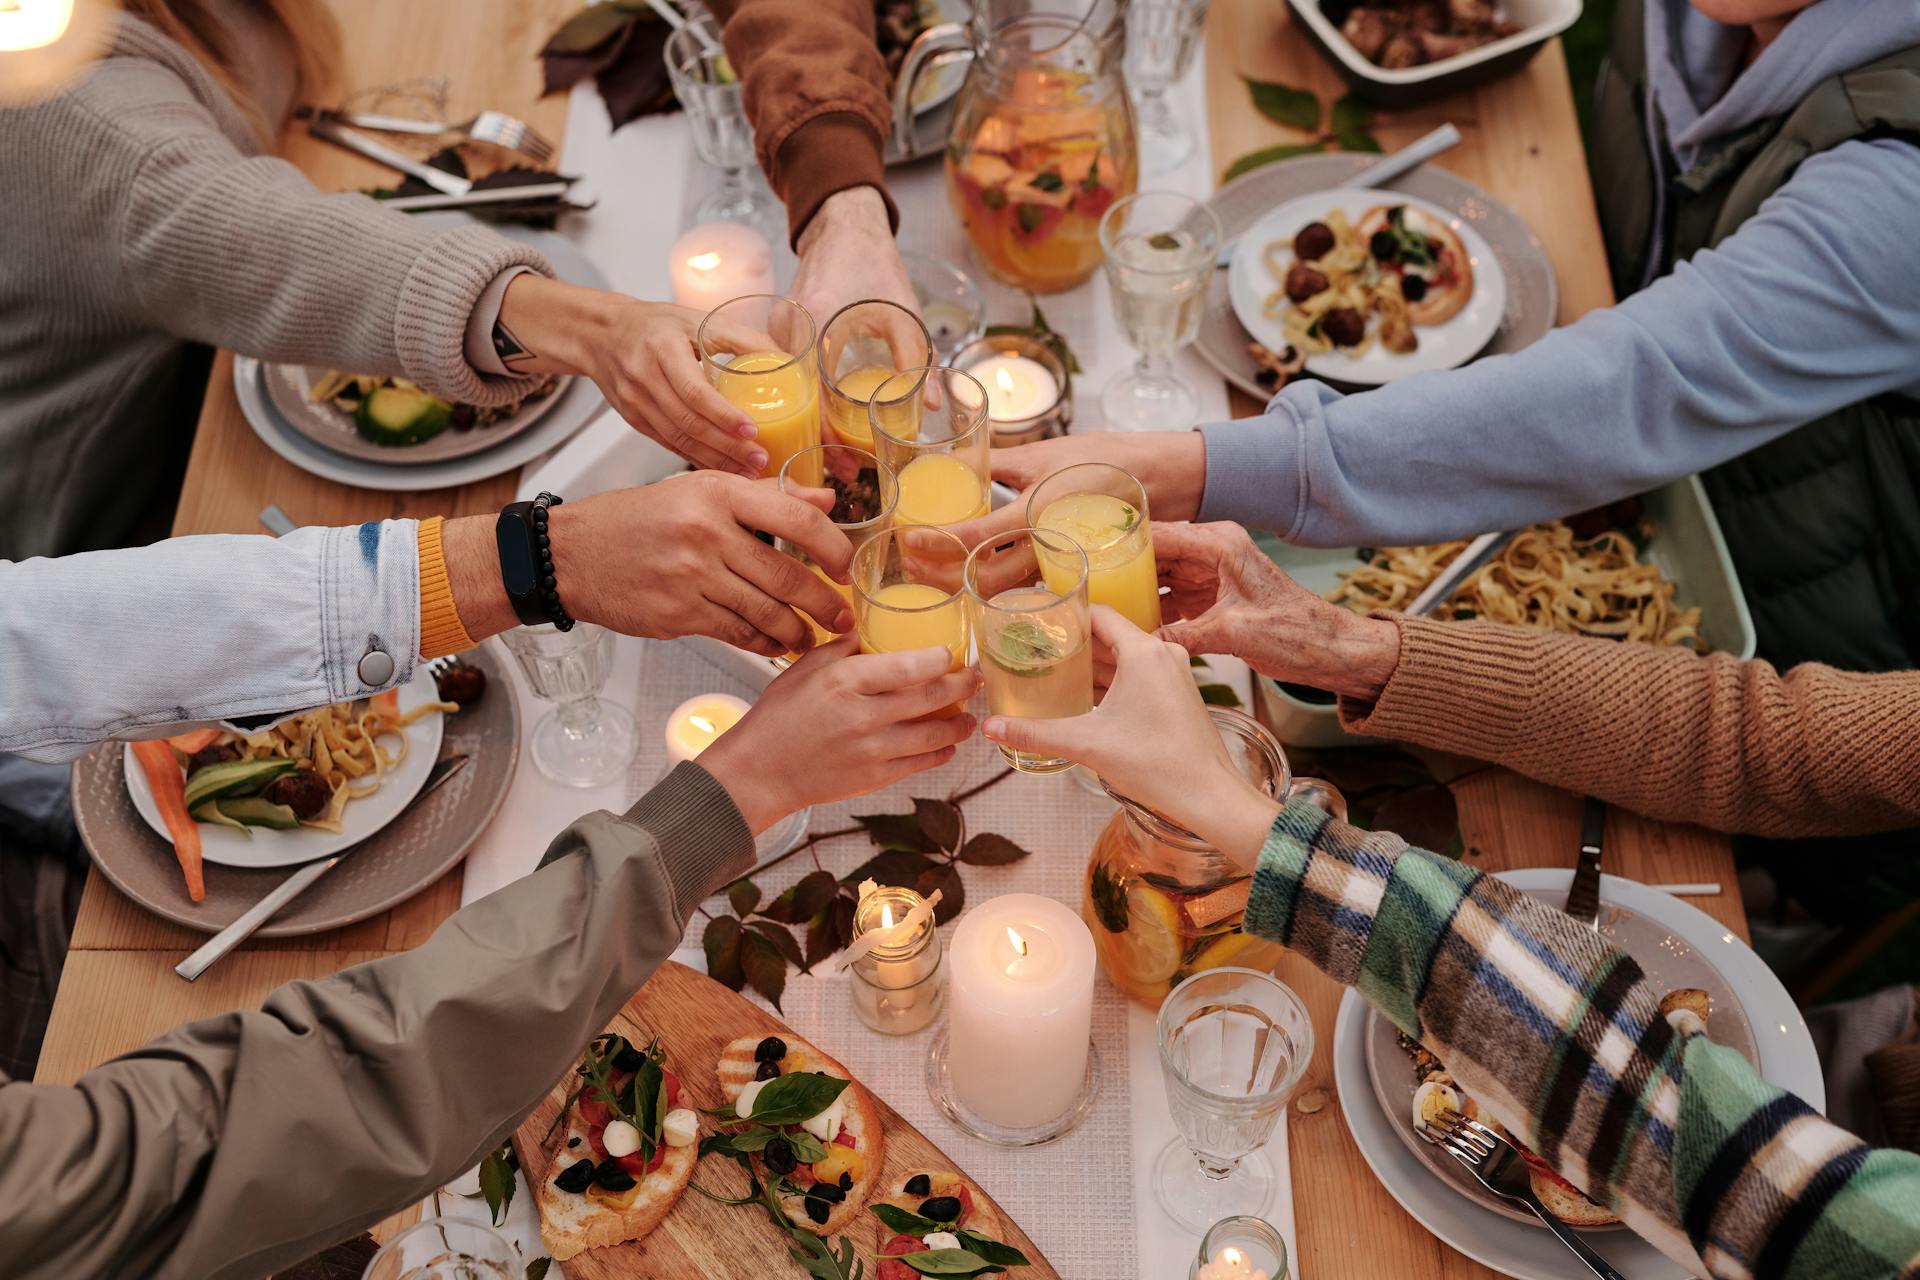 A close-up photo of family members toasting at dinner | Source: Pexels